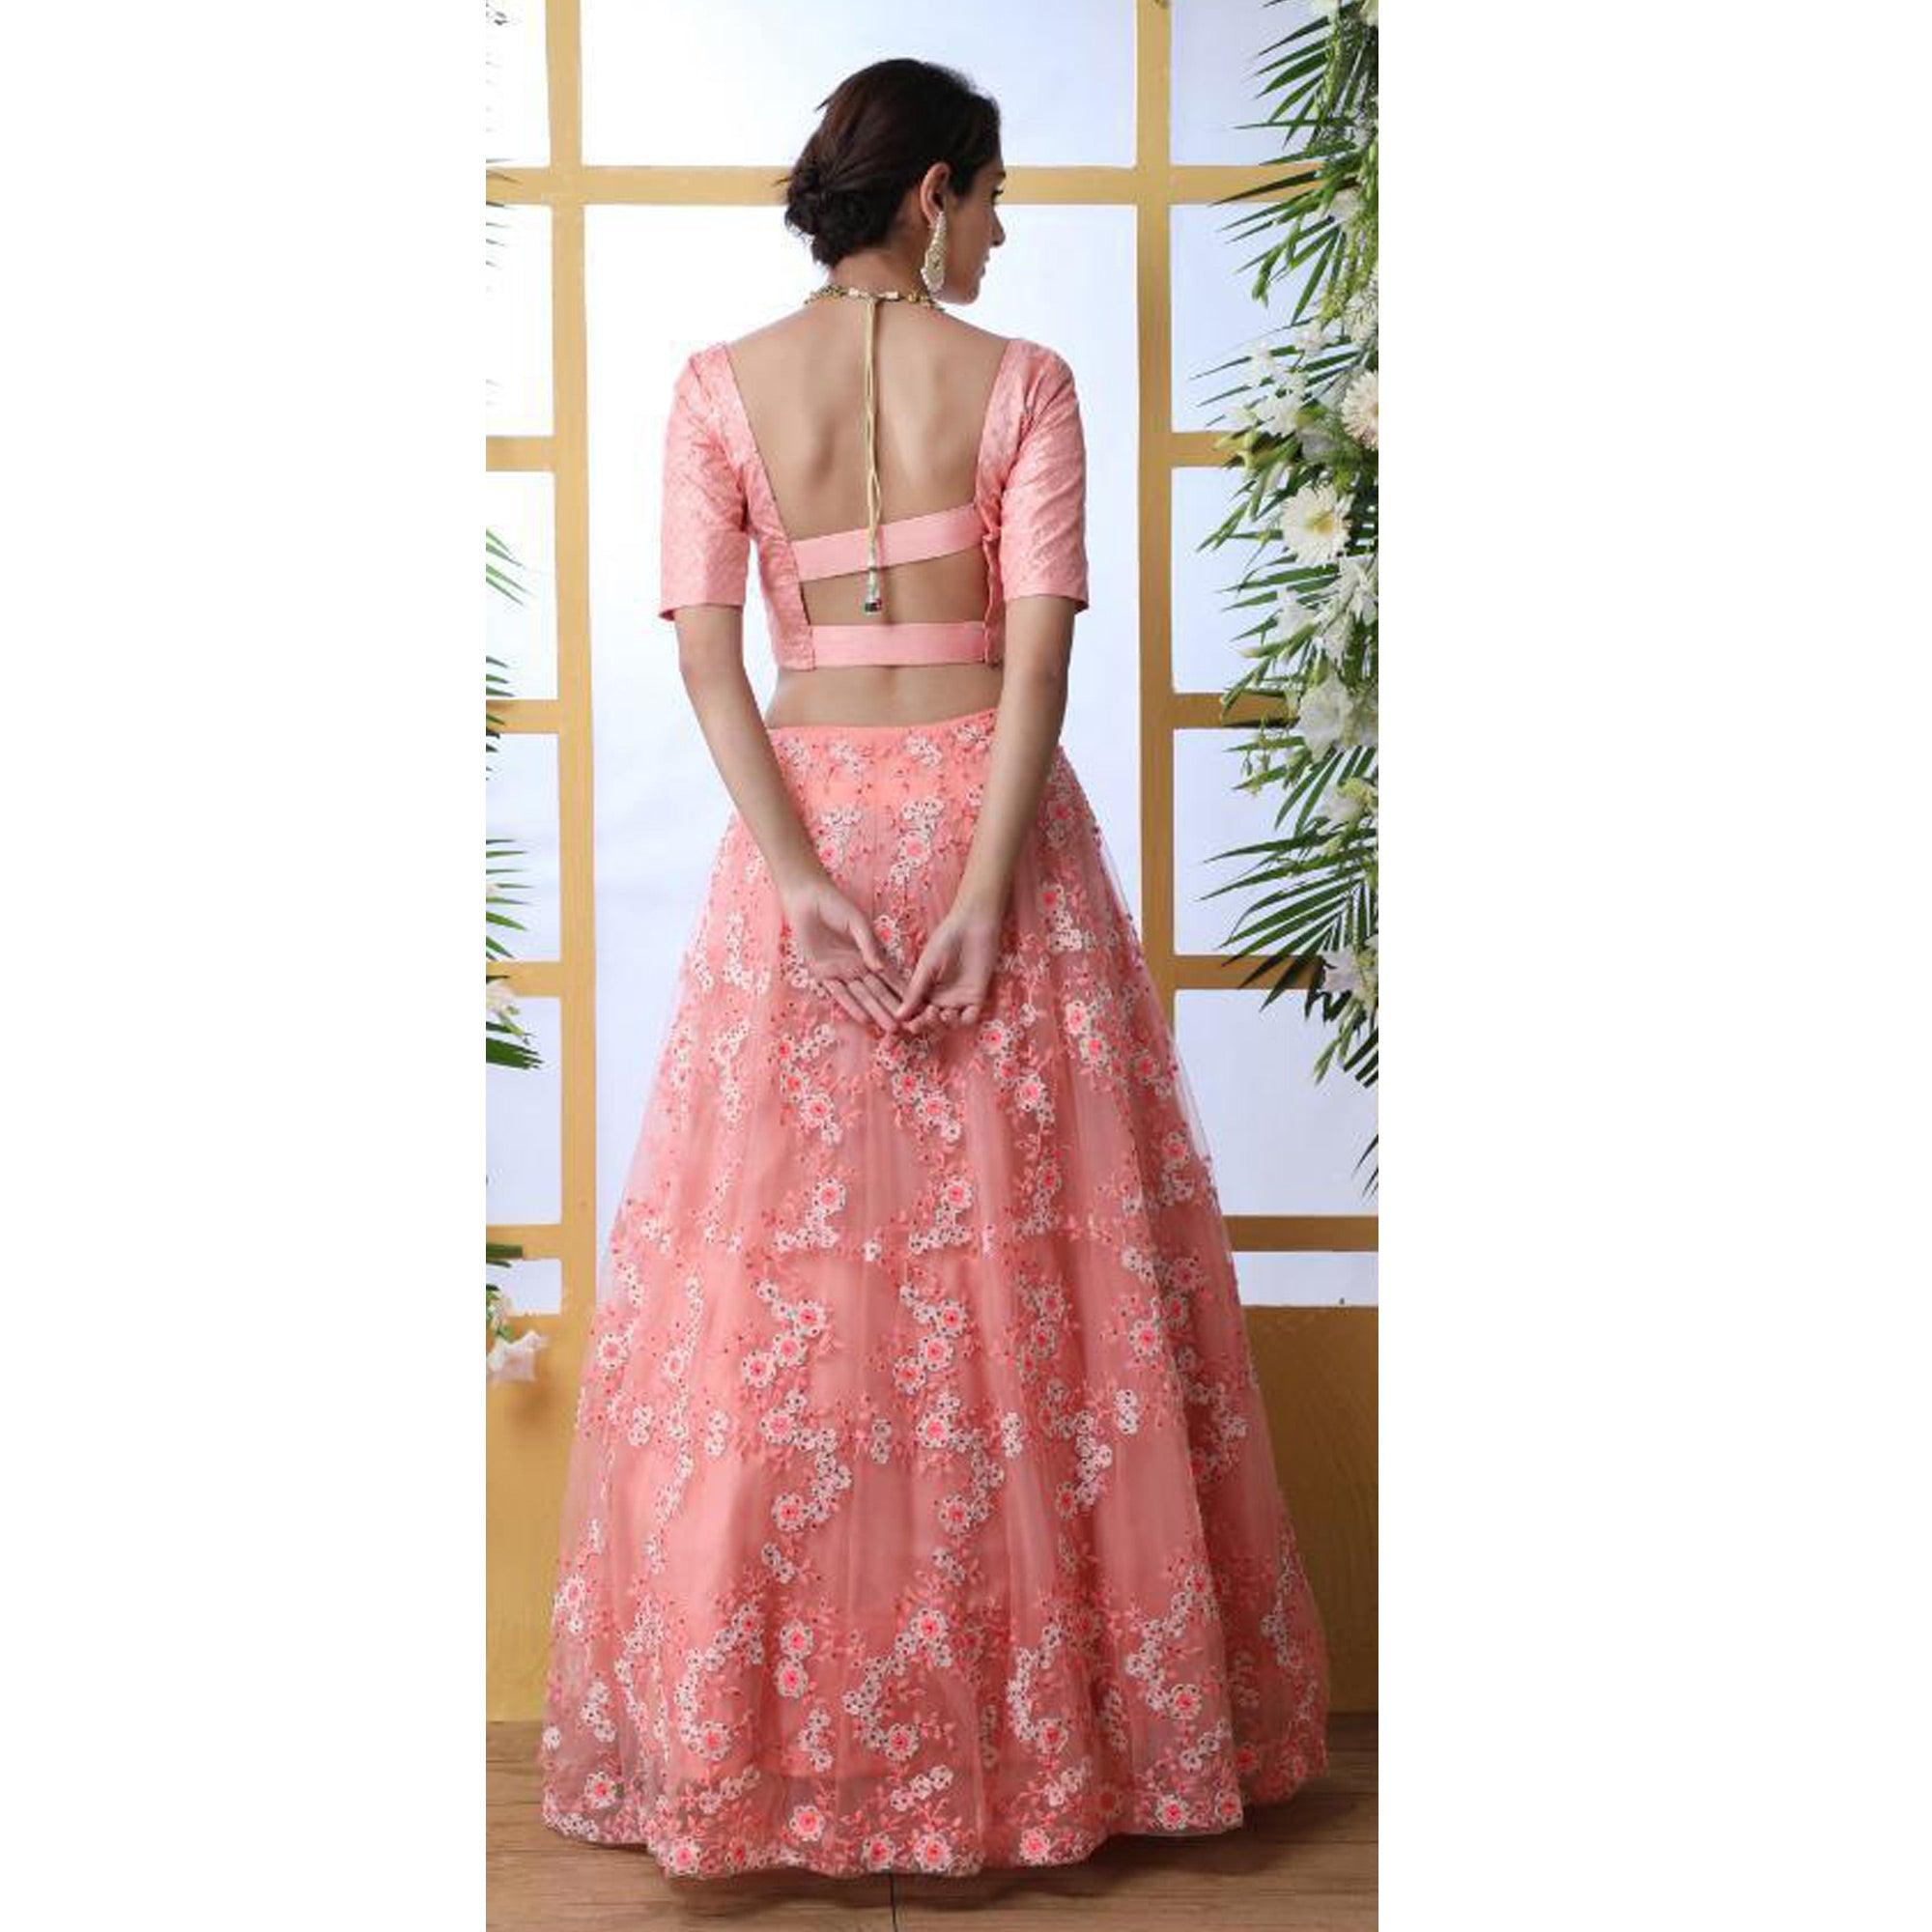 Attractive Peach Colored Party Wear Embrodiered Net Lehenga Choli - Peachmode